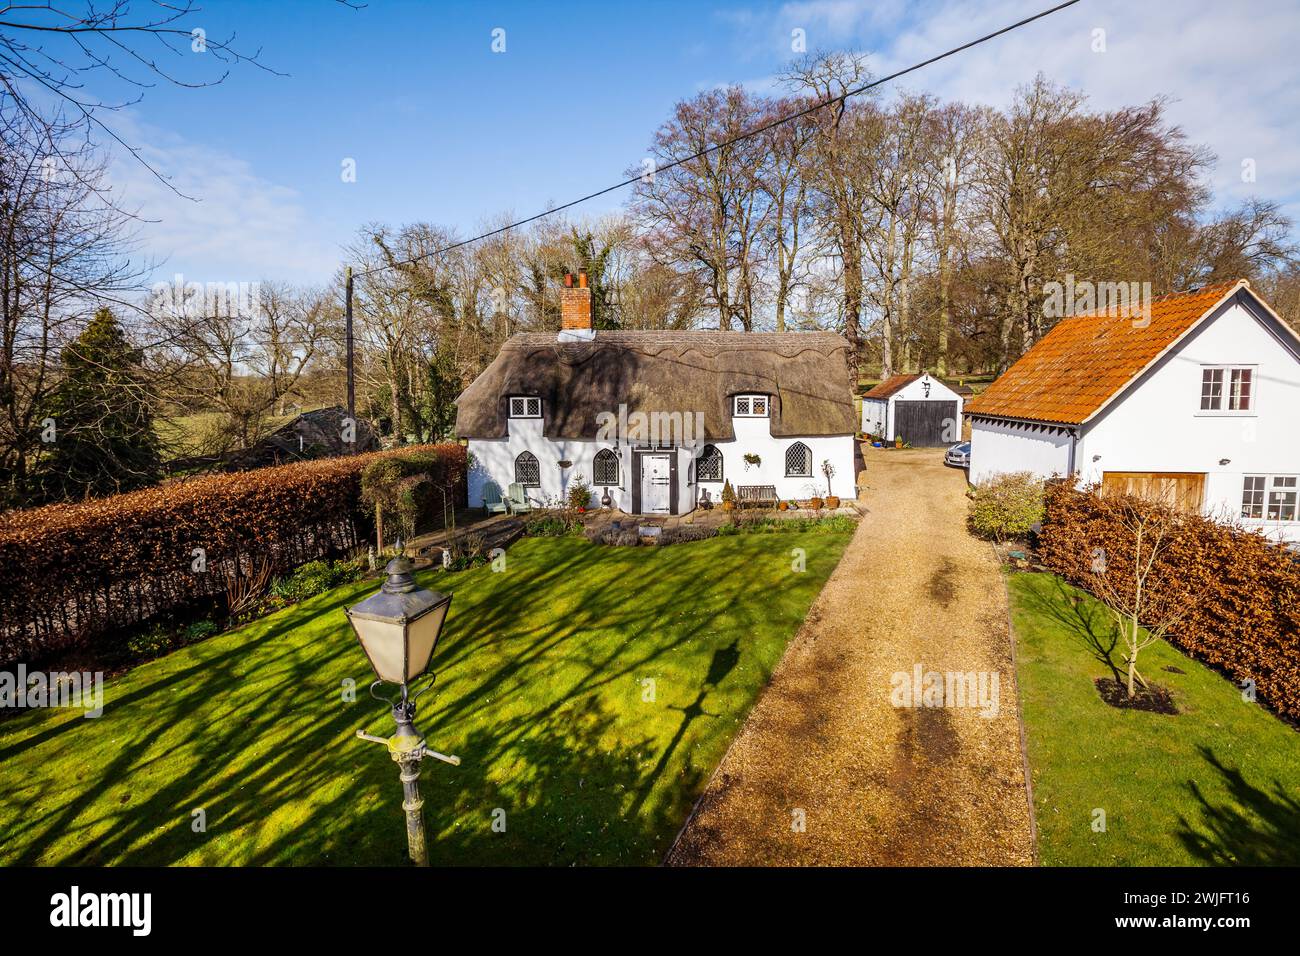 Dalham, Suffolk, England - Feb 19 2016: 16th Century thatched grade II listed cottage in countryside Stock Photo